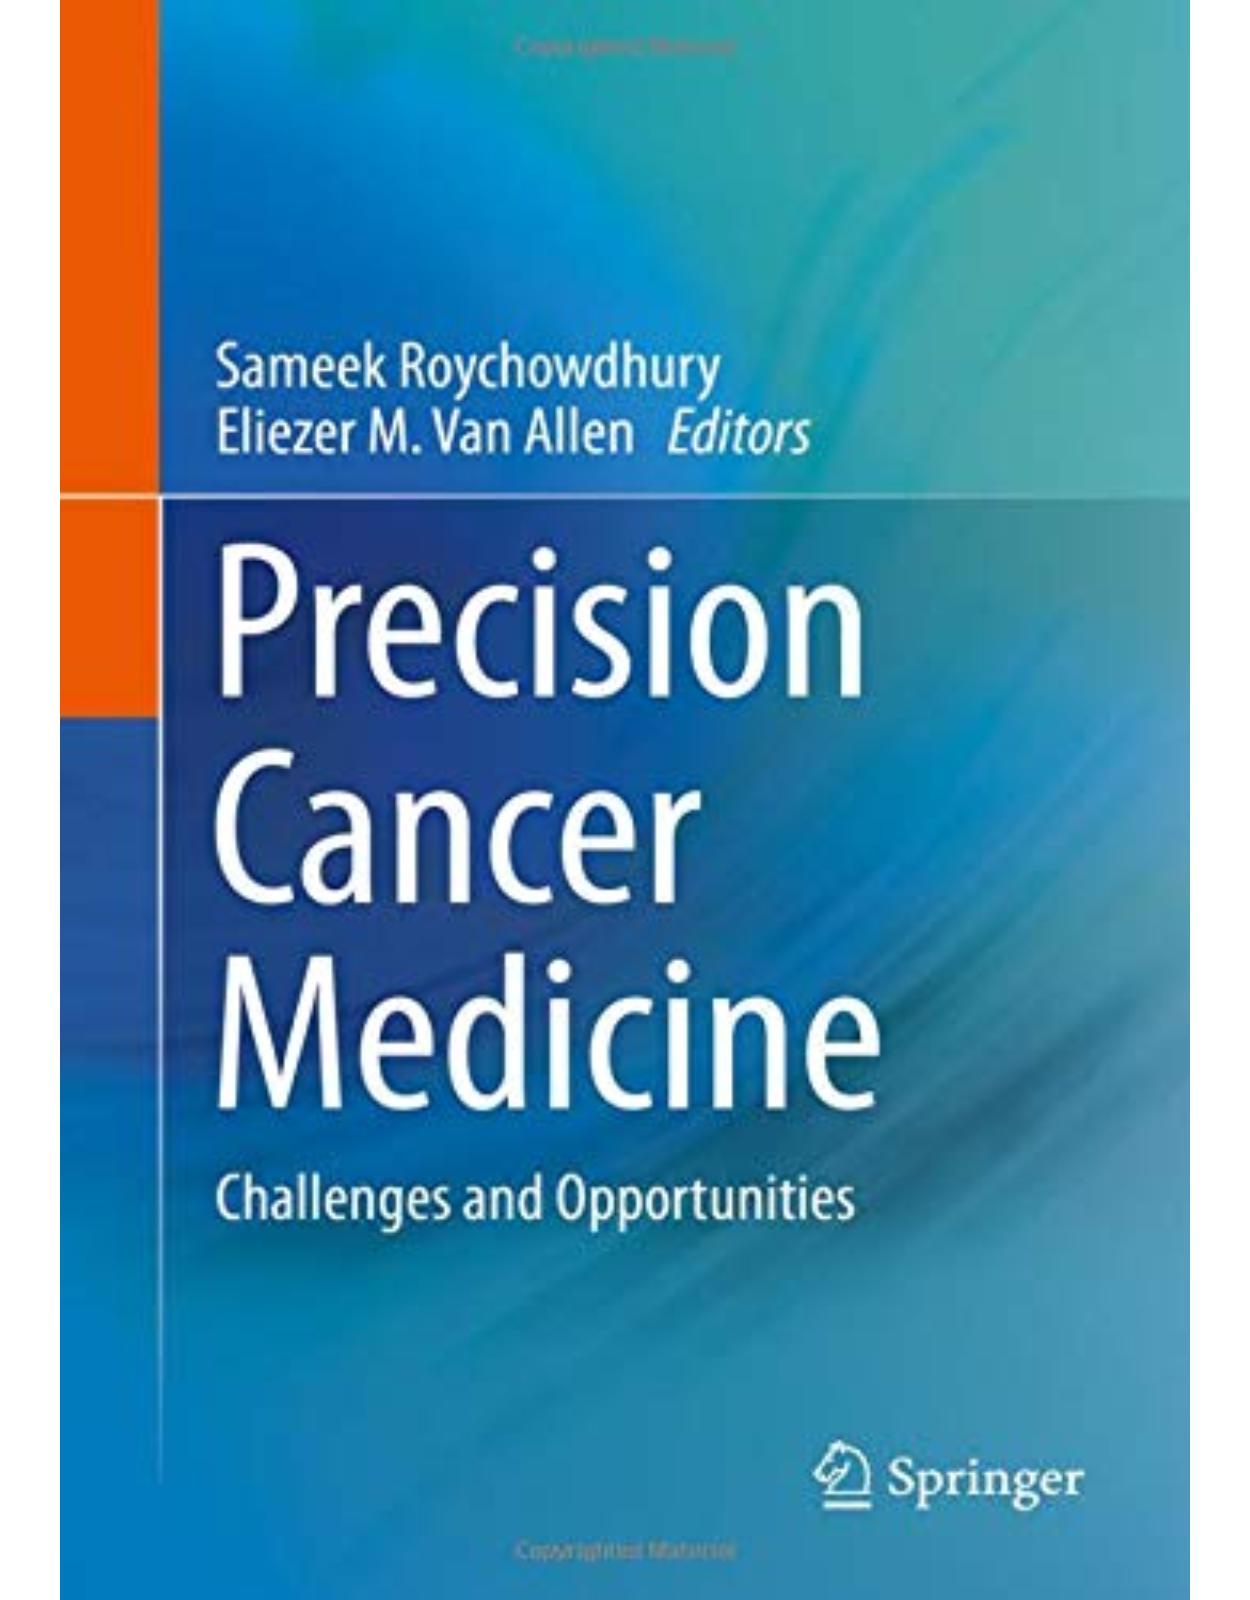 Precision Cancer Medicine: Challenges and Opportunities